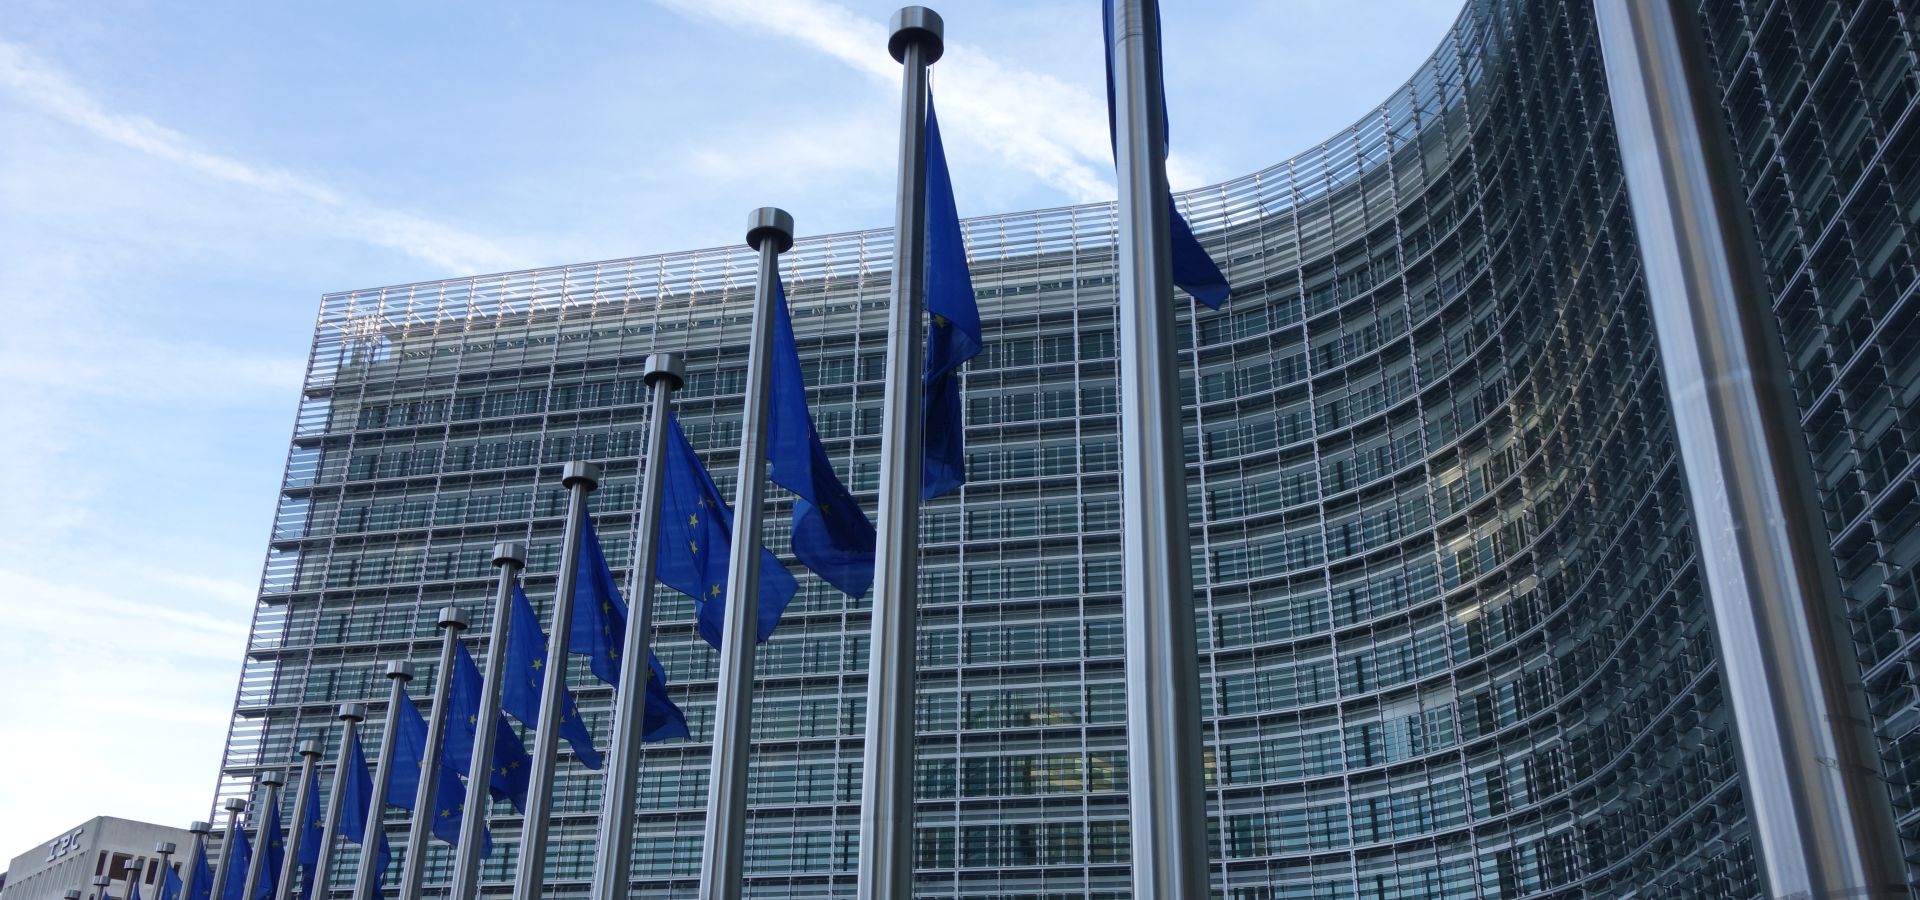 The Berlaymont building in Brussels with flags of the European Union in front of it. 